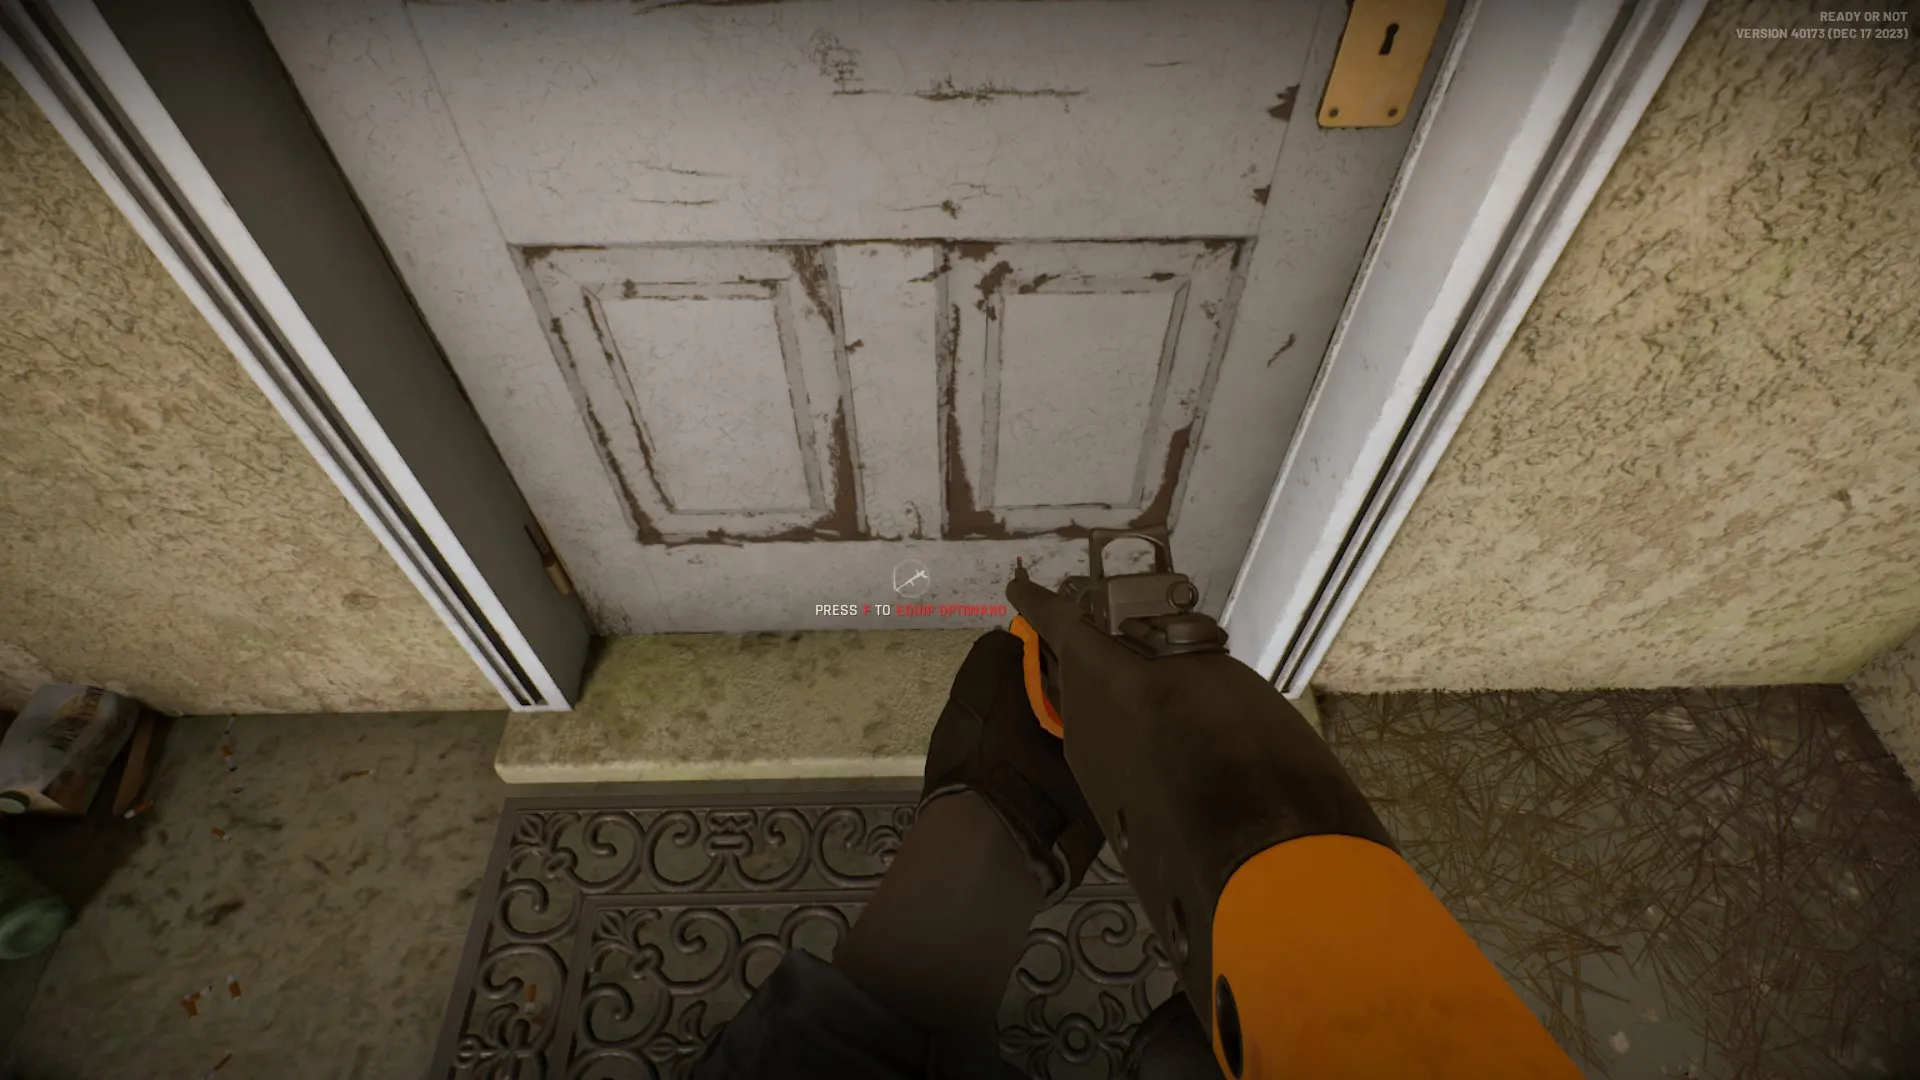 Mirror gun pointed at the bottom of the door in Ready or Not